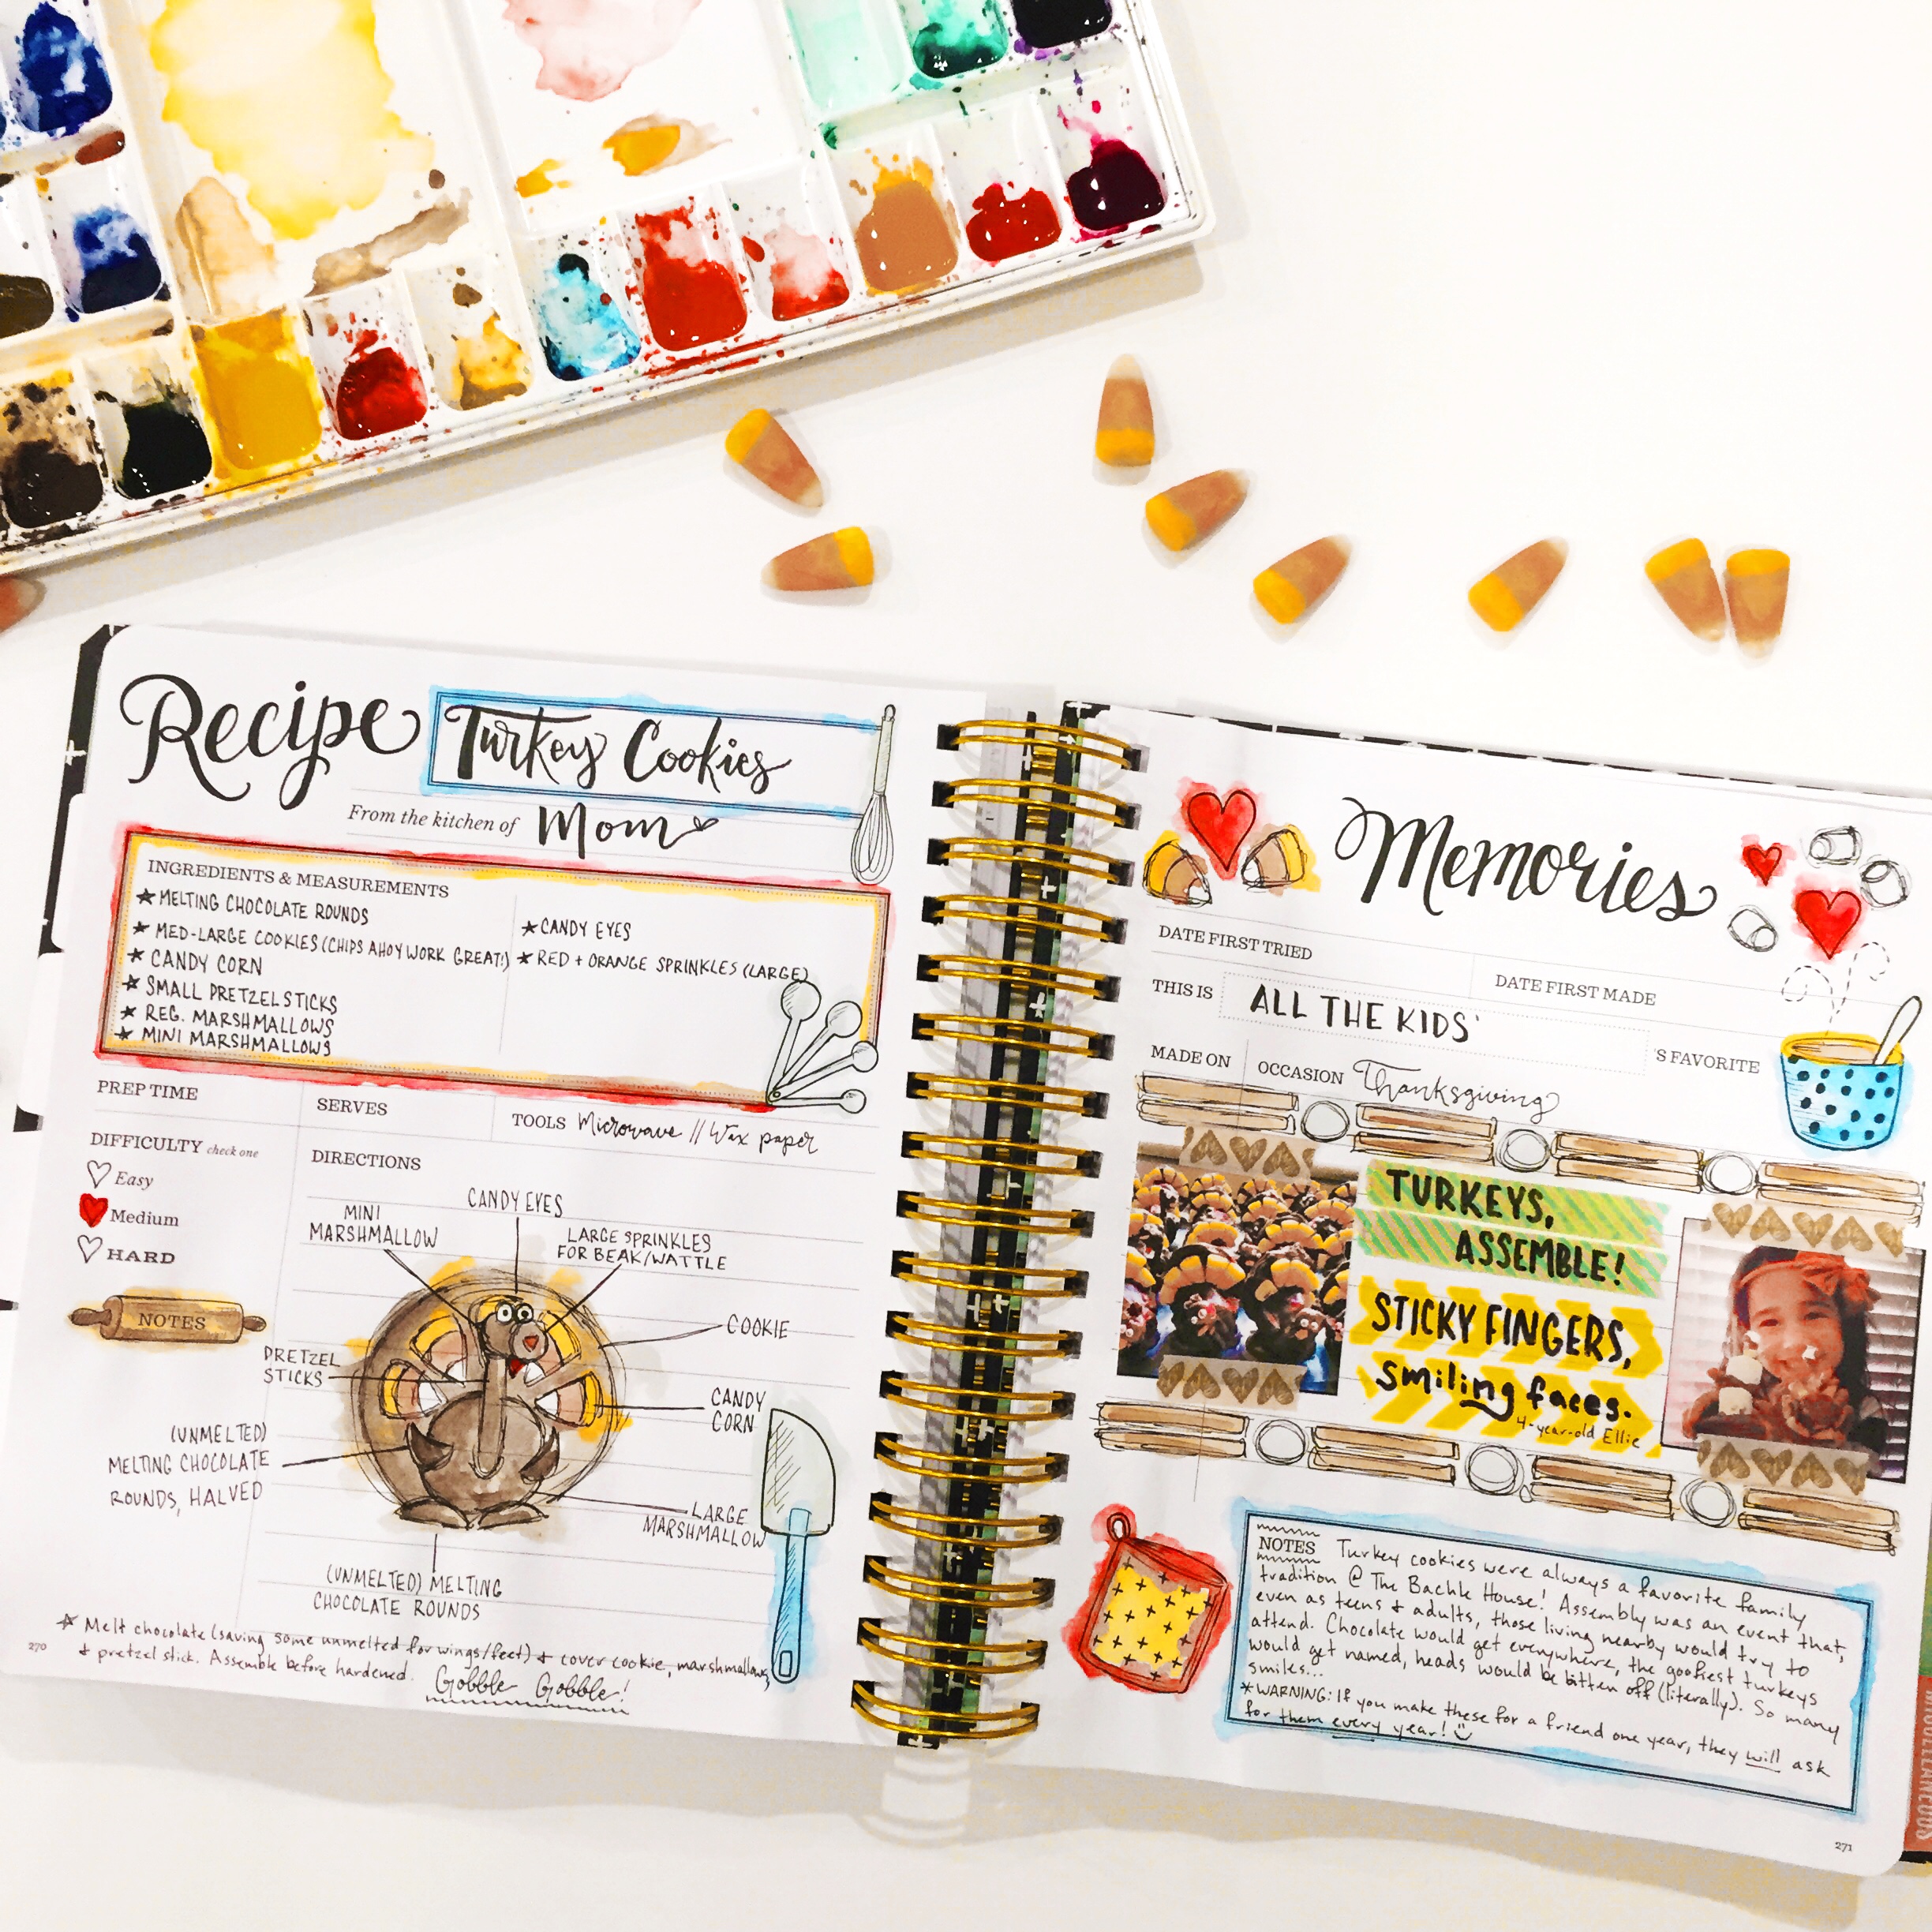 The Keepsake Kitchen Diary is a DIY recipe book for those looking to add some nostalgia to their recipe books.